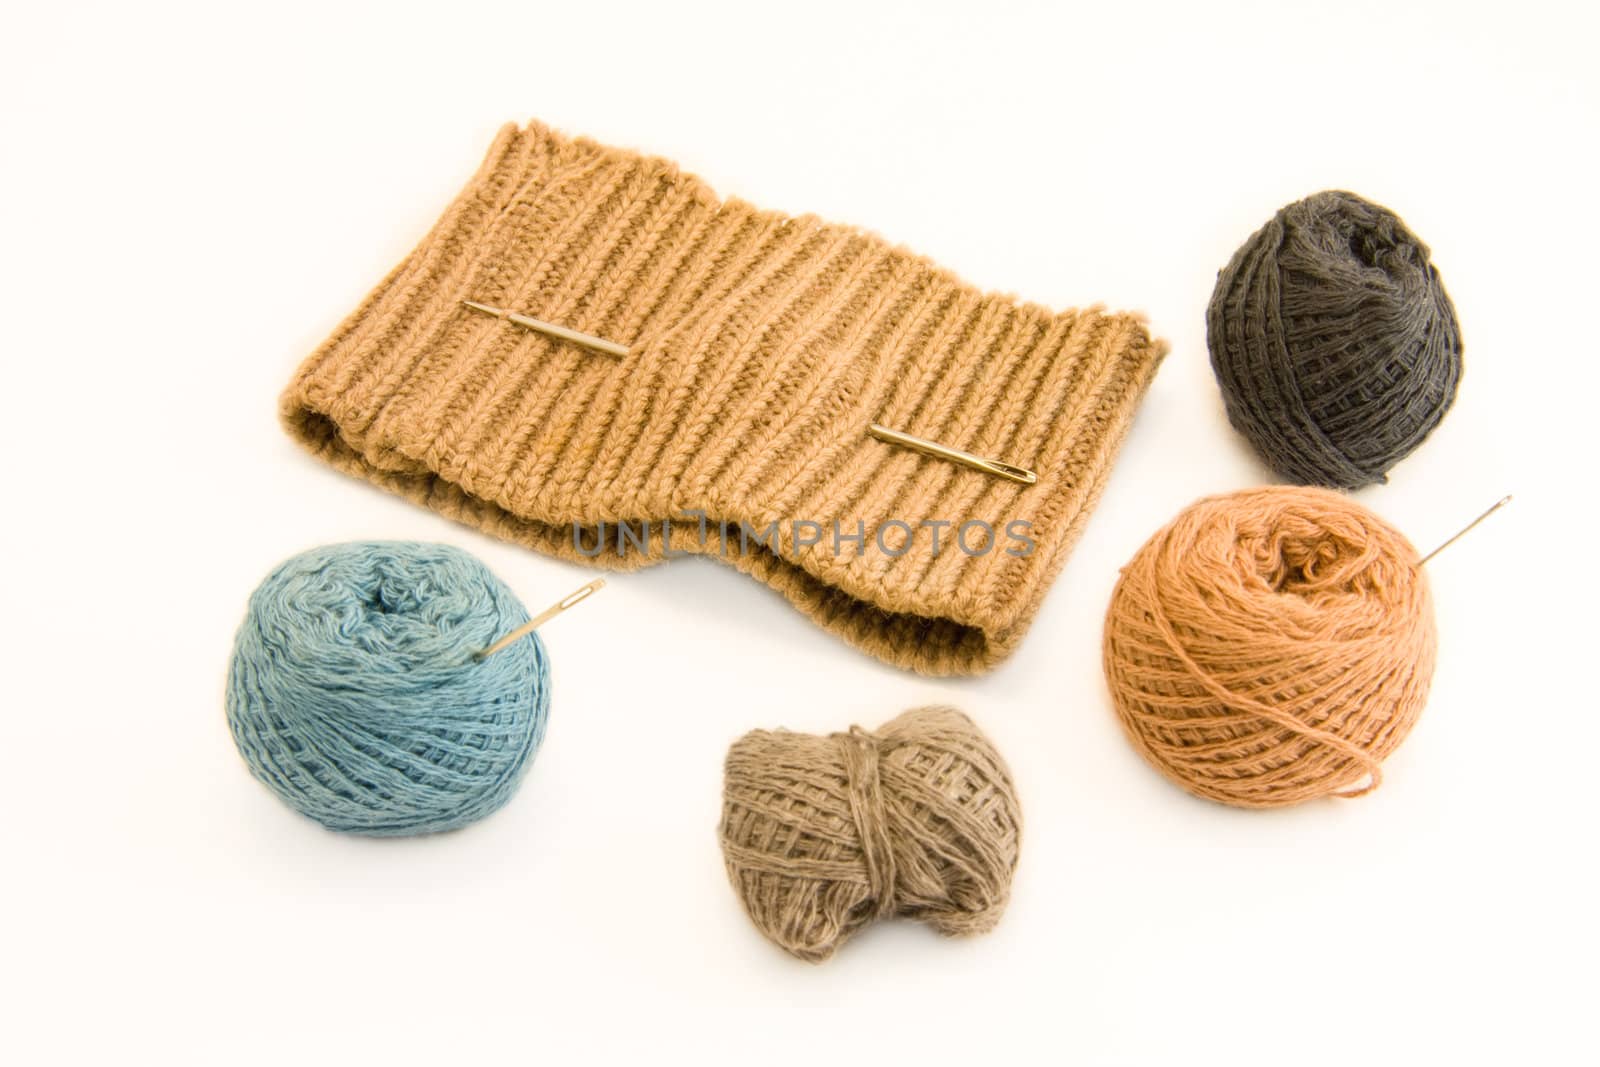 Knitted garment and skeins of yarn by rozhenyuk